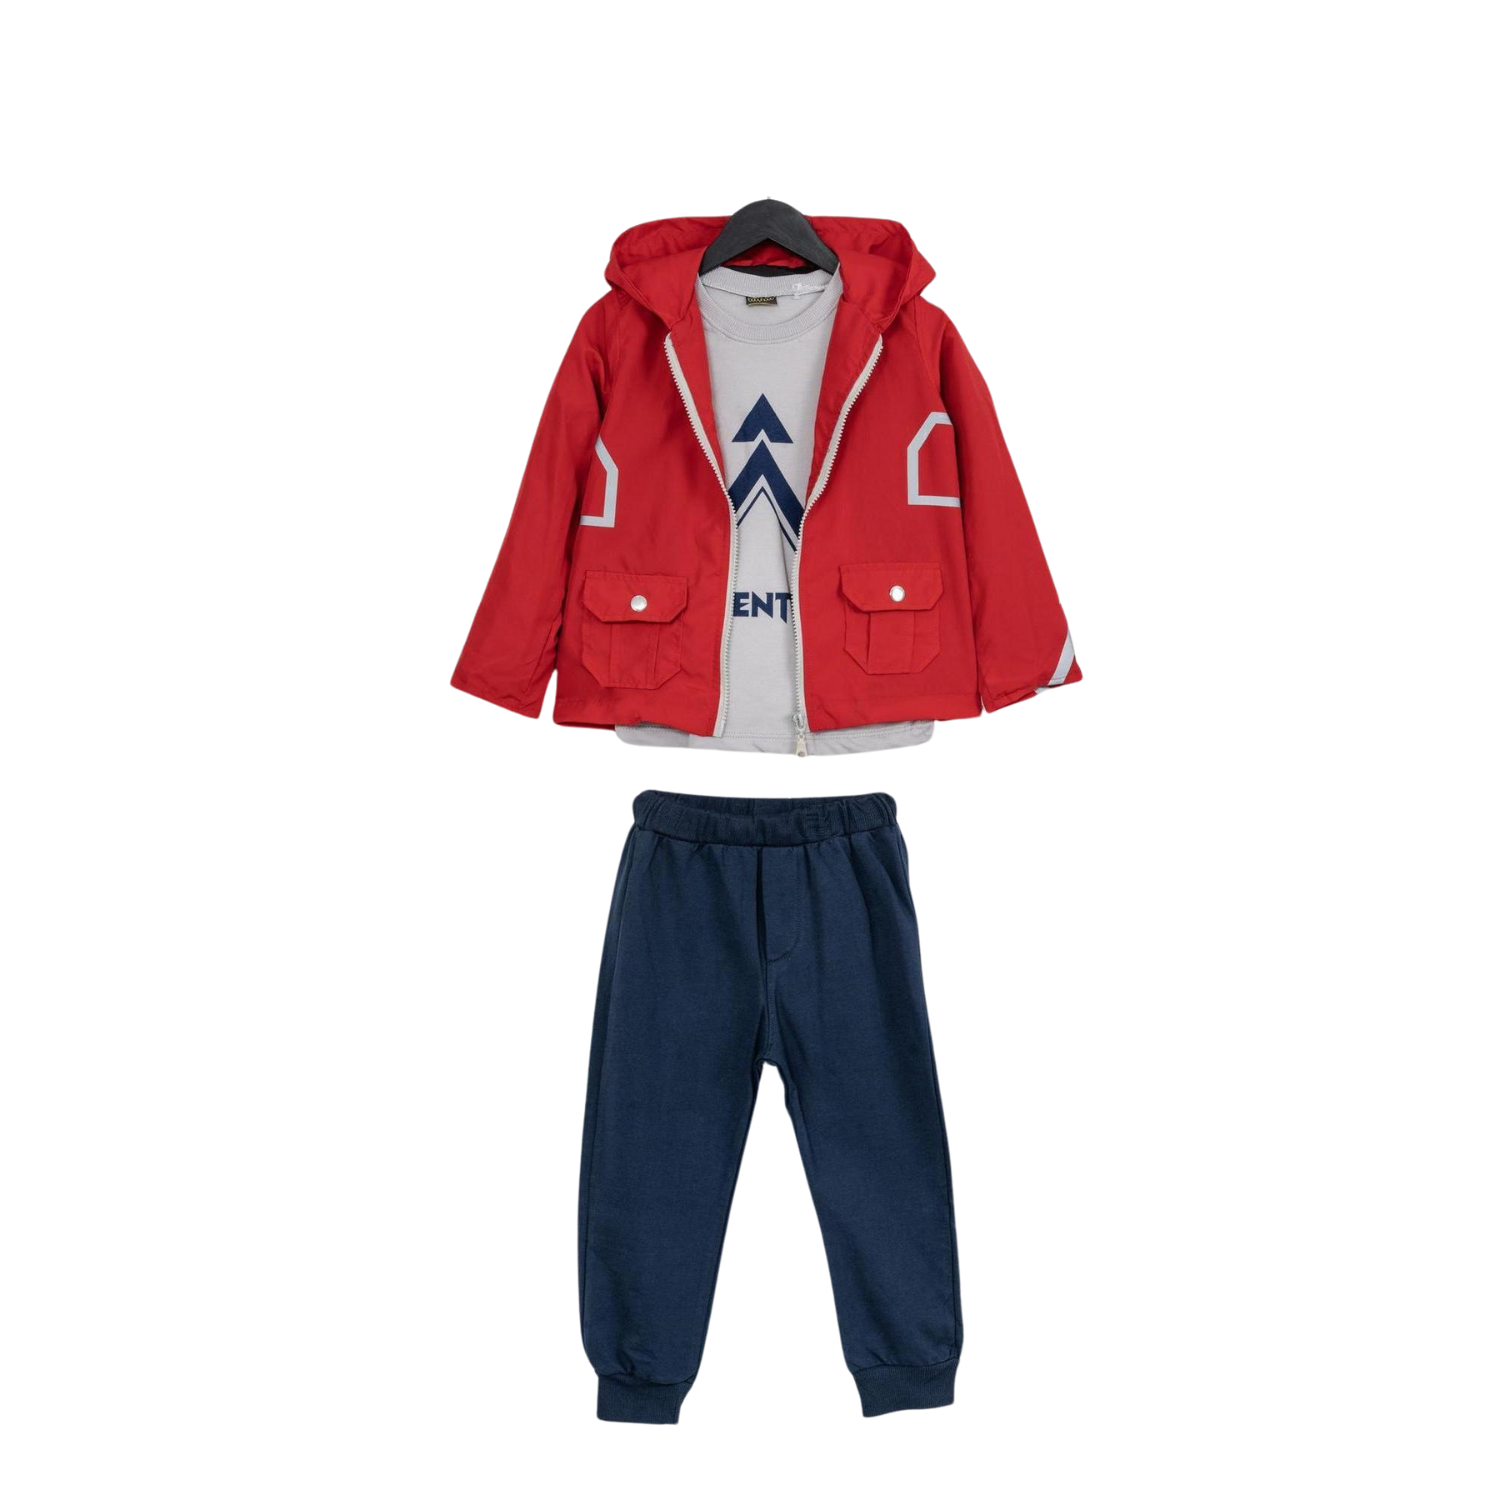 Red Jacket Boys Casual Set